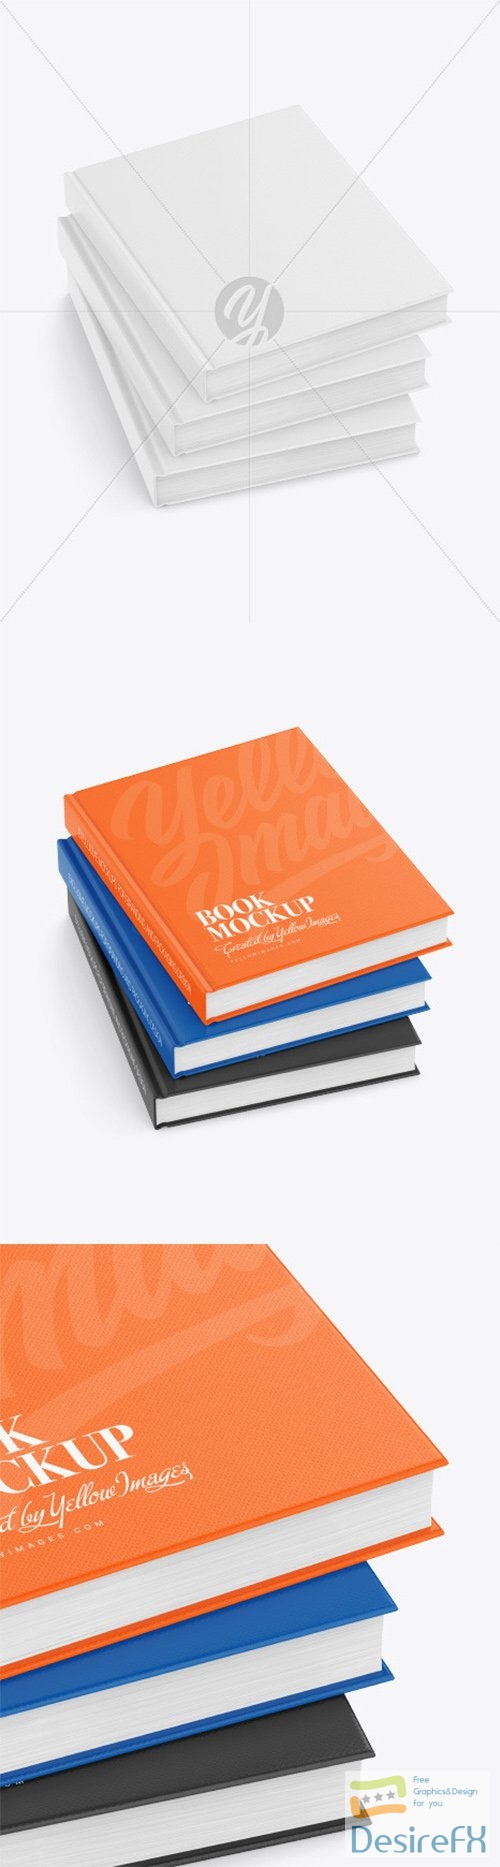 Hardcover Books w/ Fabric Cover Mockup 64829